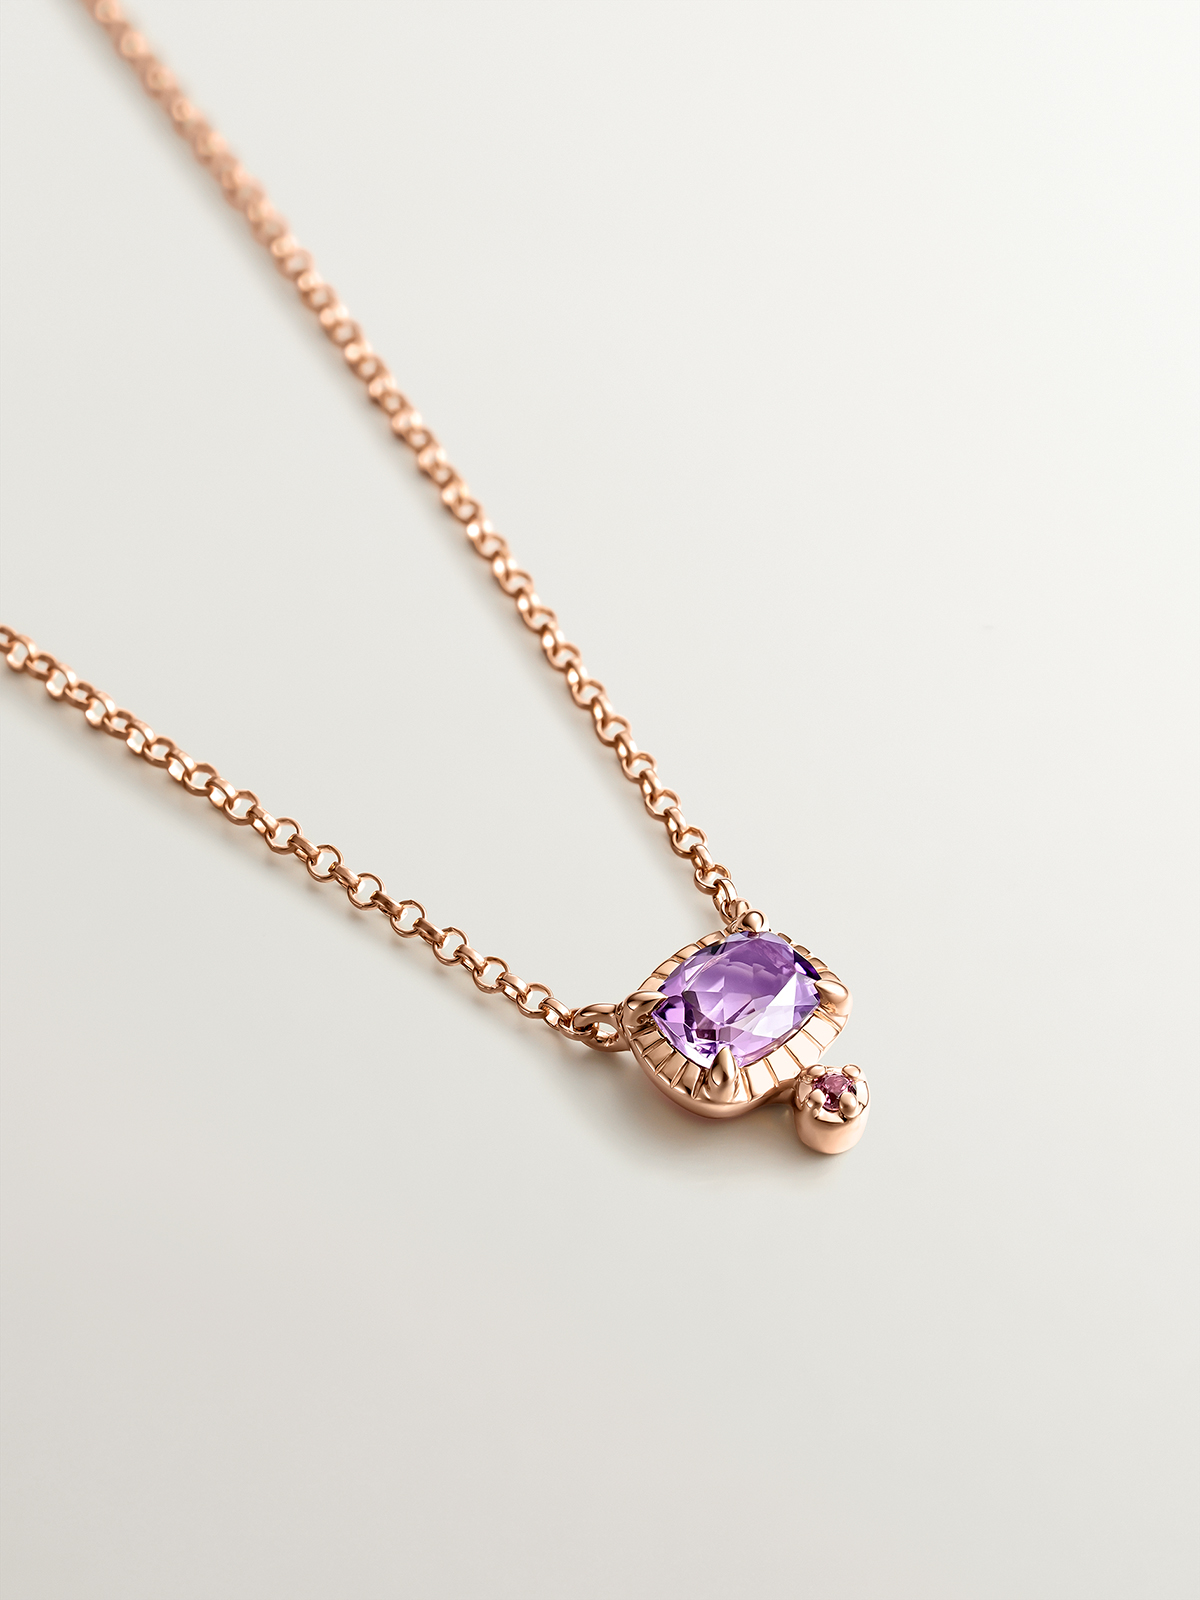 925 Silver pendant dipped in 18K rose gold with purple amethyst and pink rhodolite.